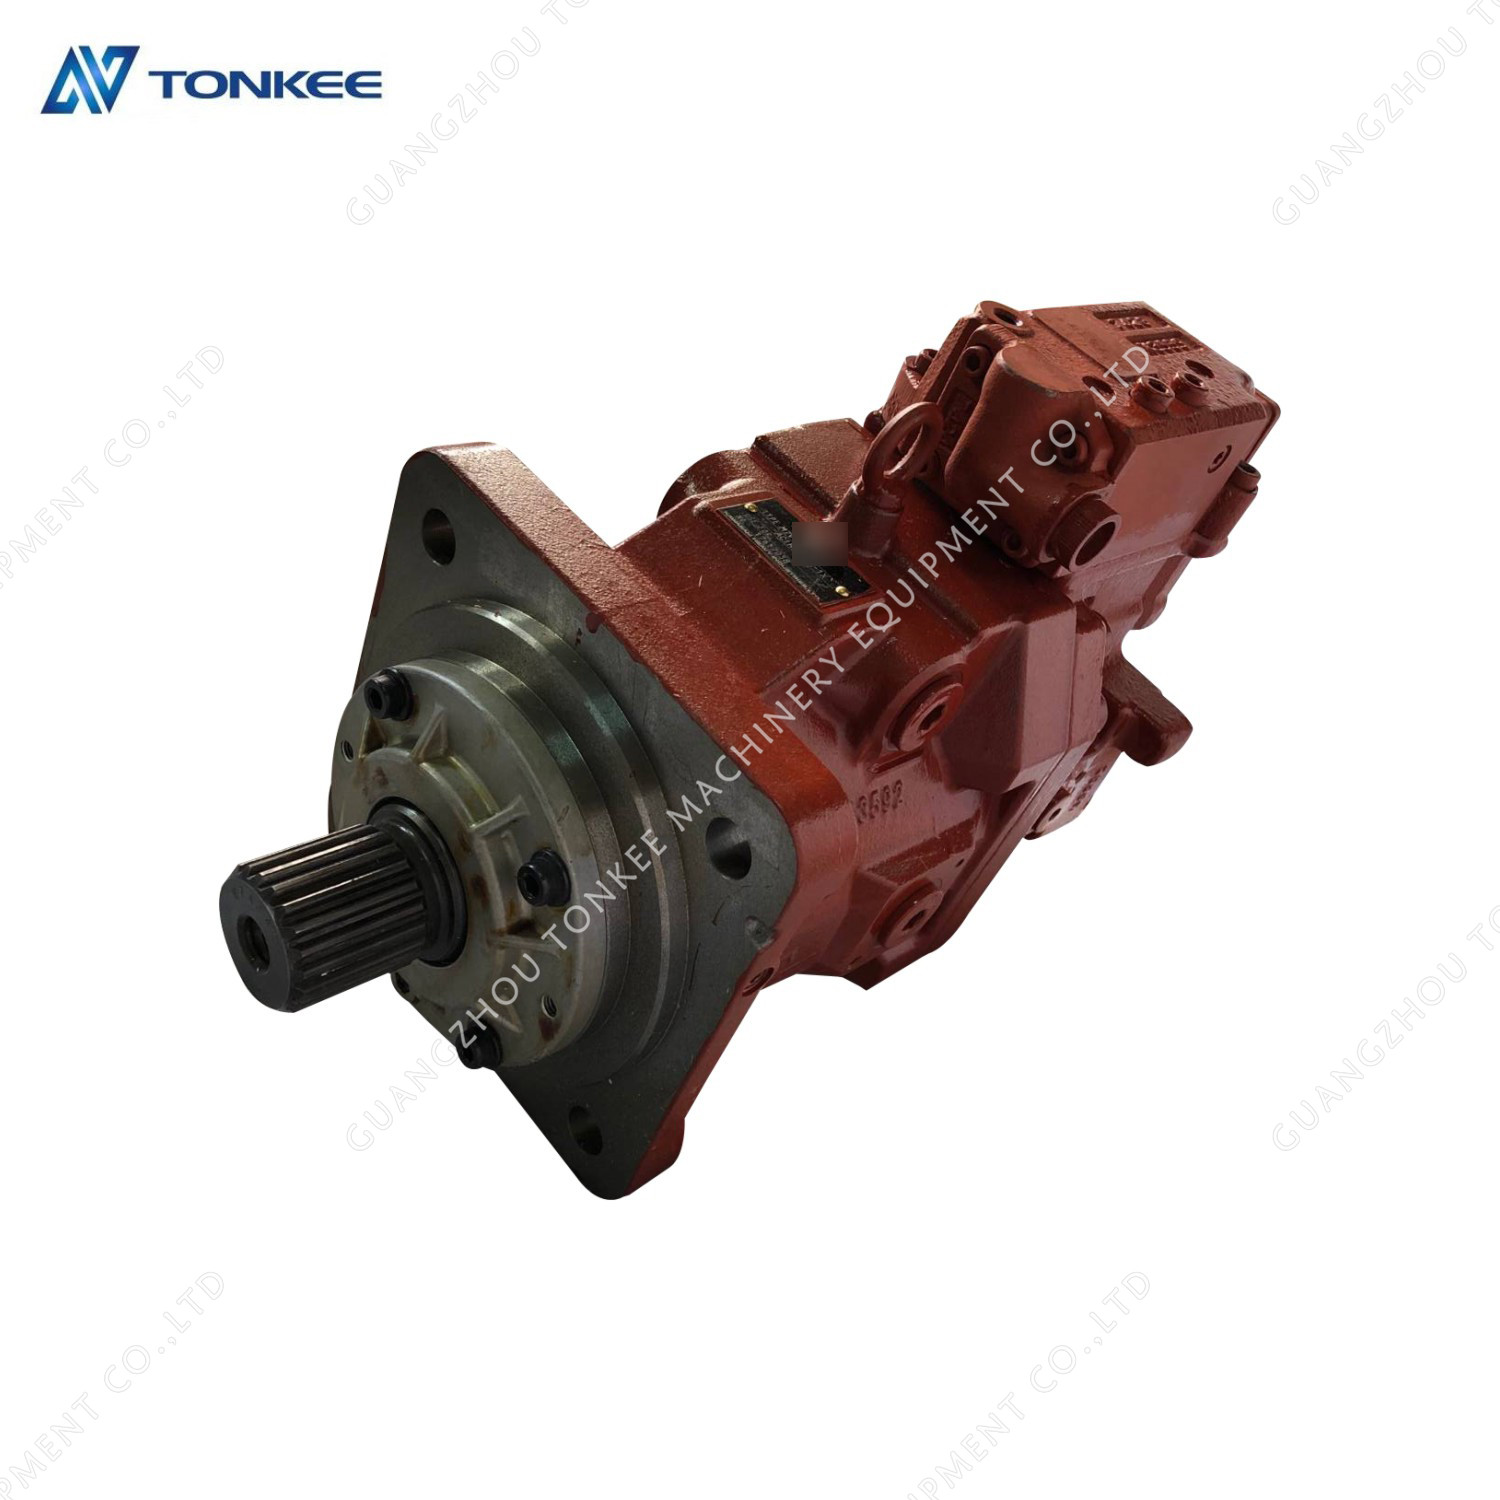 genuine new M7V112CA47 M7V112AC47-AC1H3XXXN KPM piston pump SR155C10 rotary drilling rig hydraulic main pump suitable for SANY